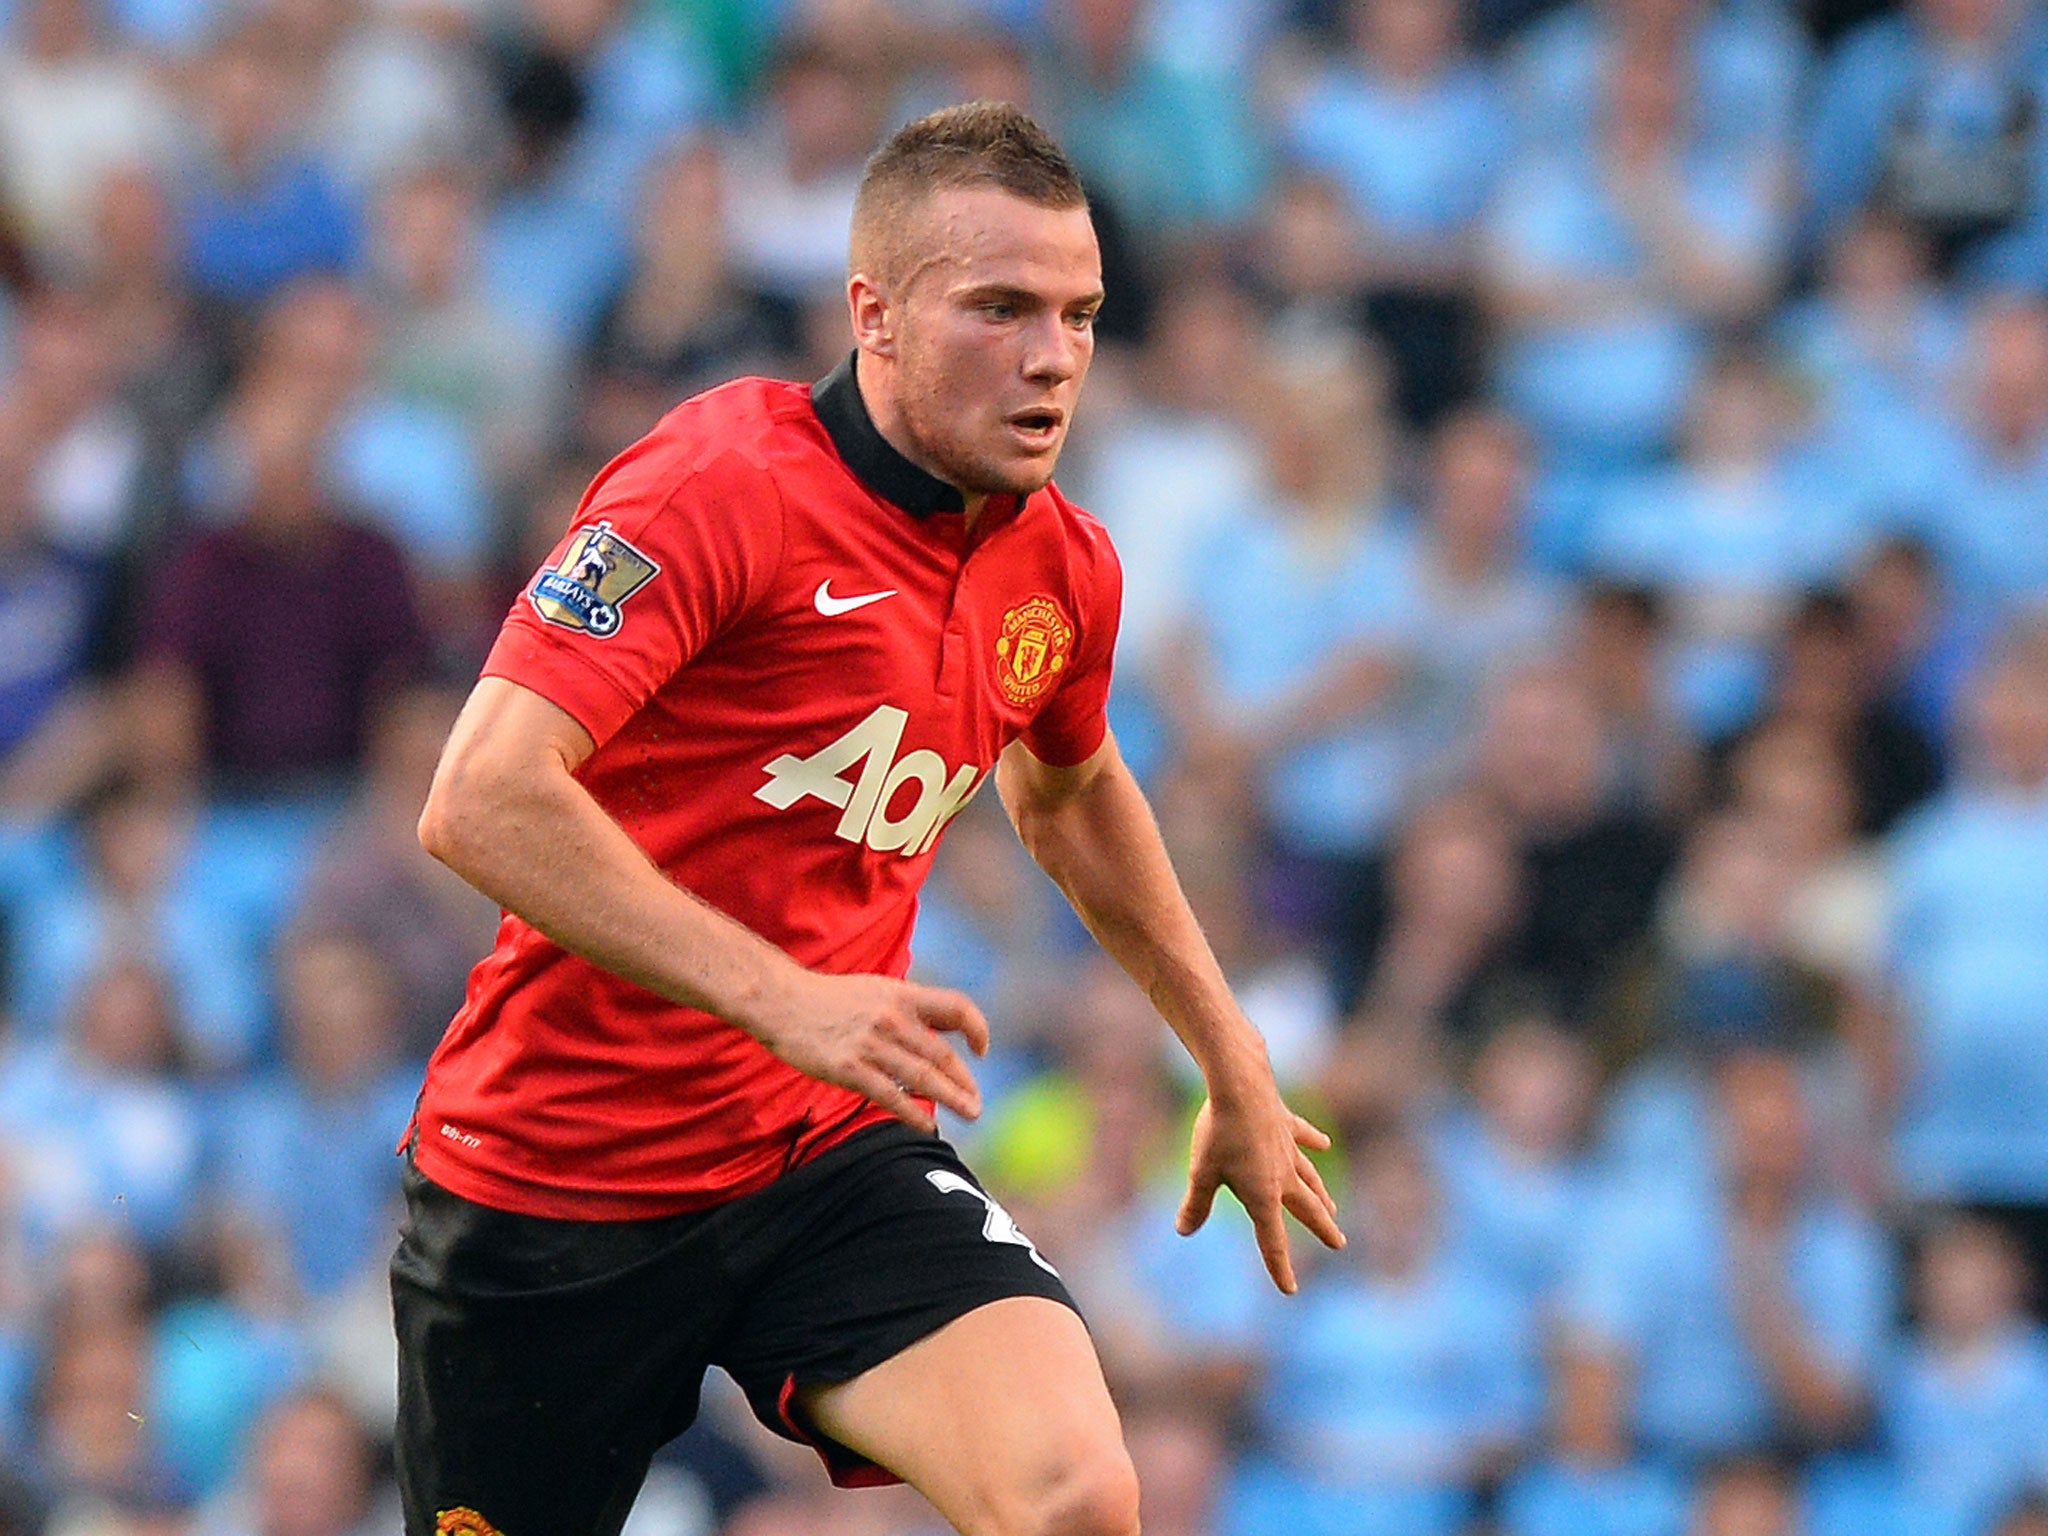 Tom Cleverley has struggled for form this season